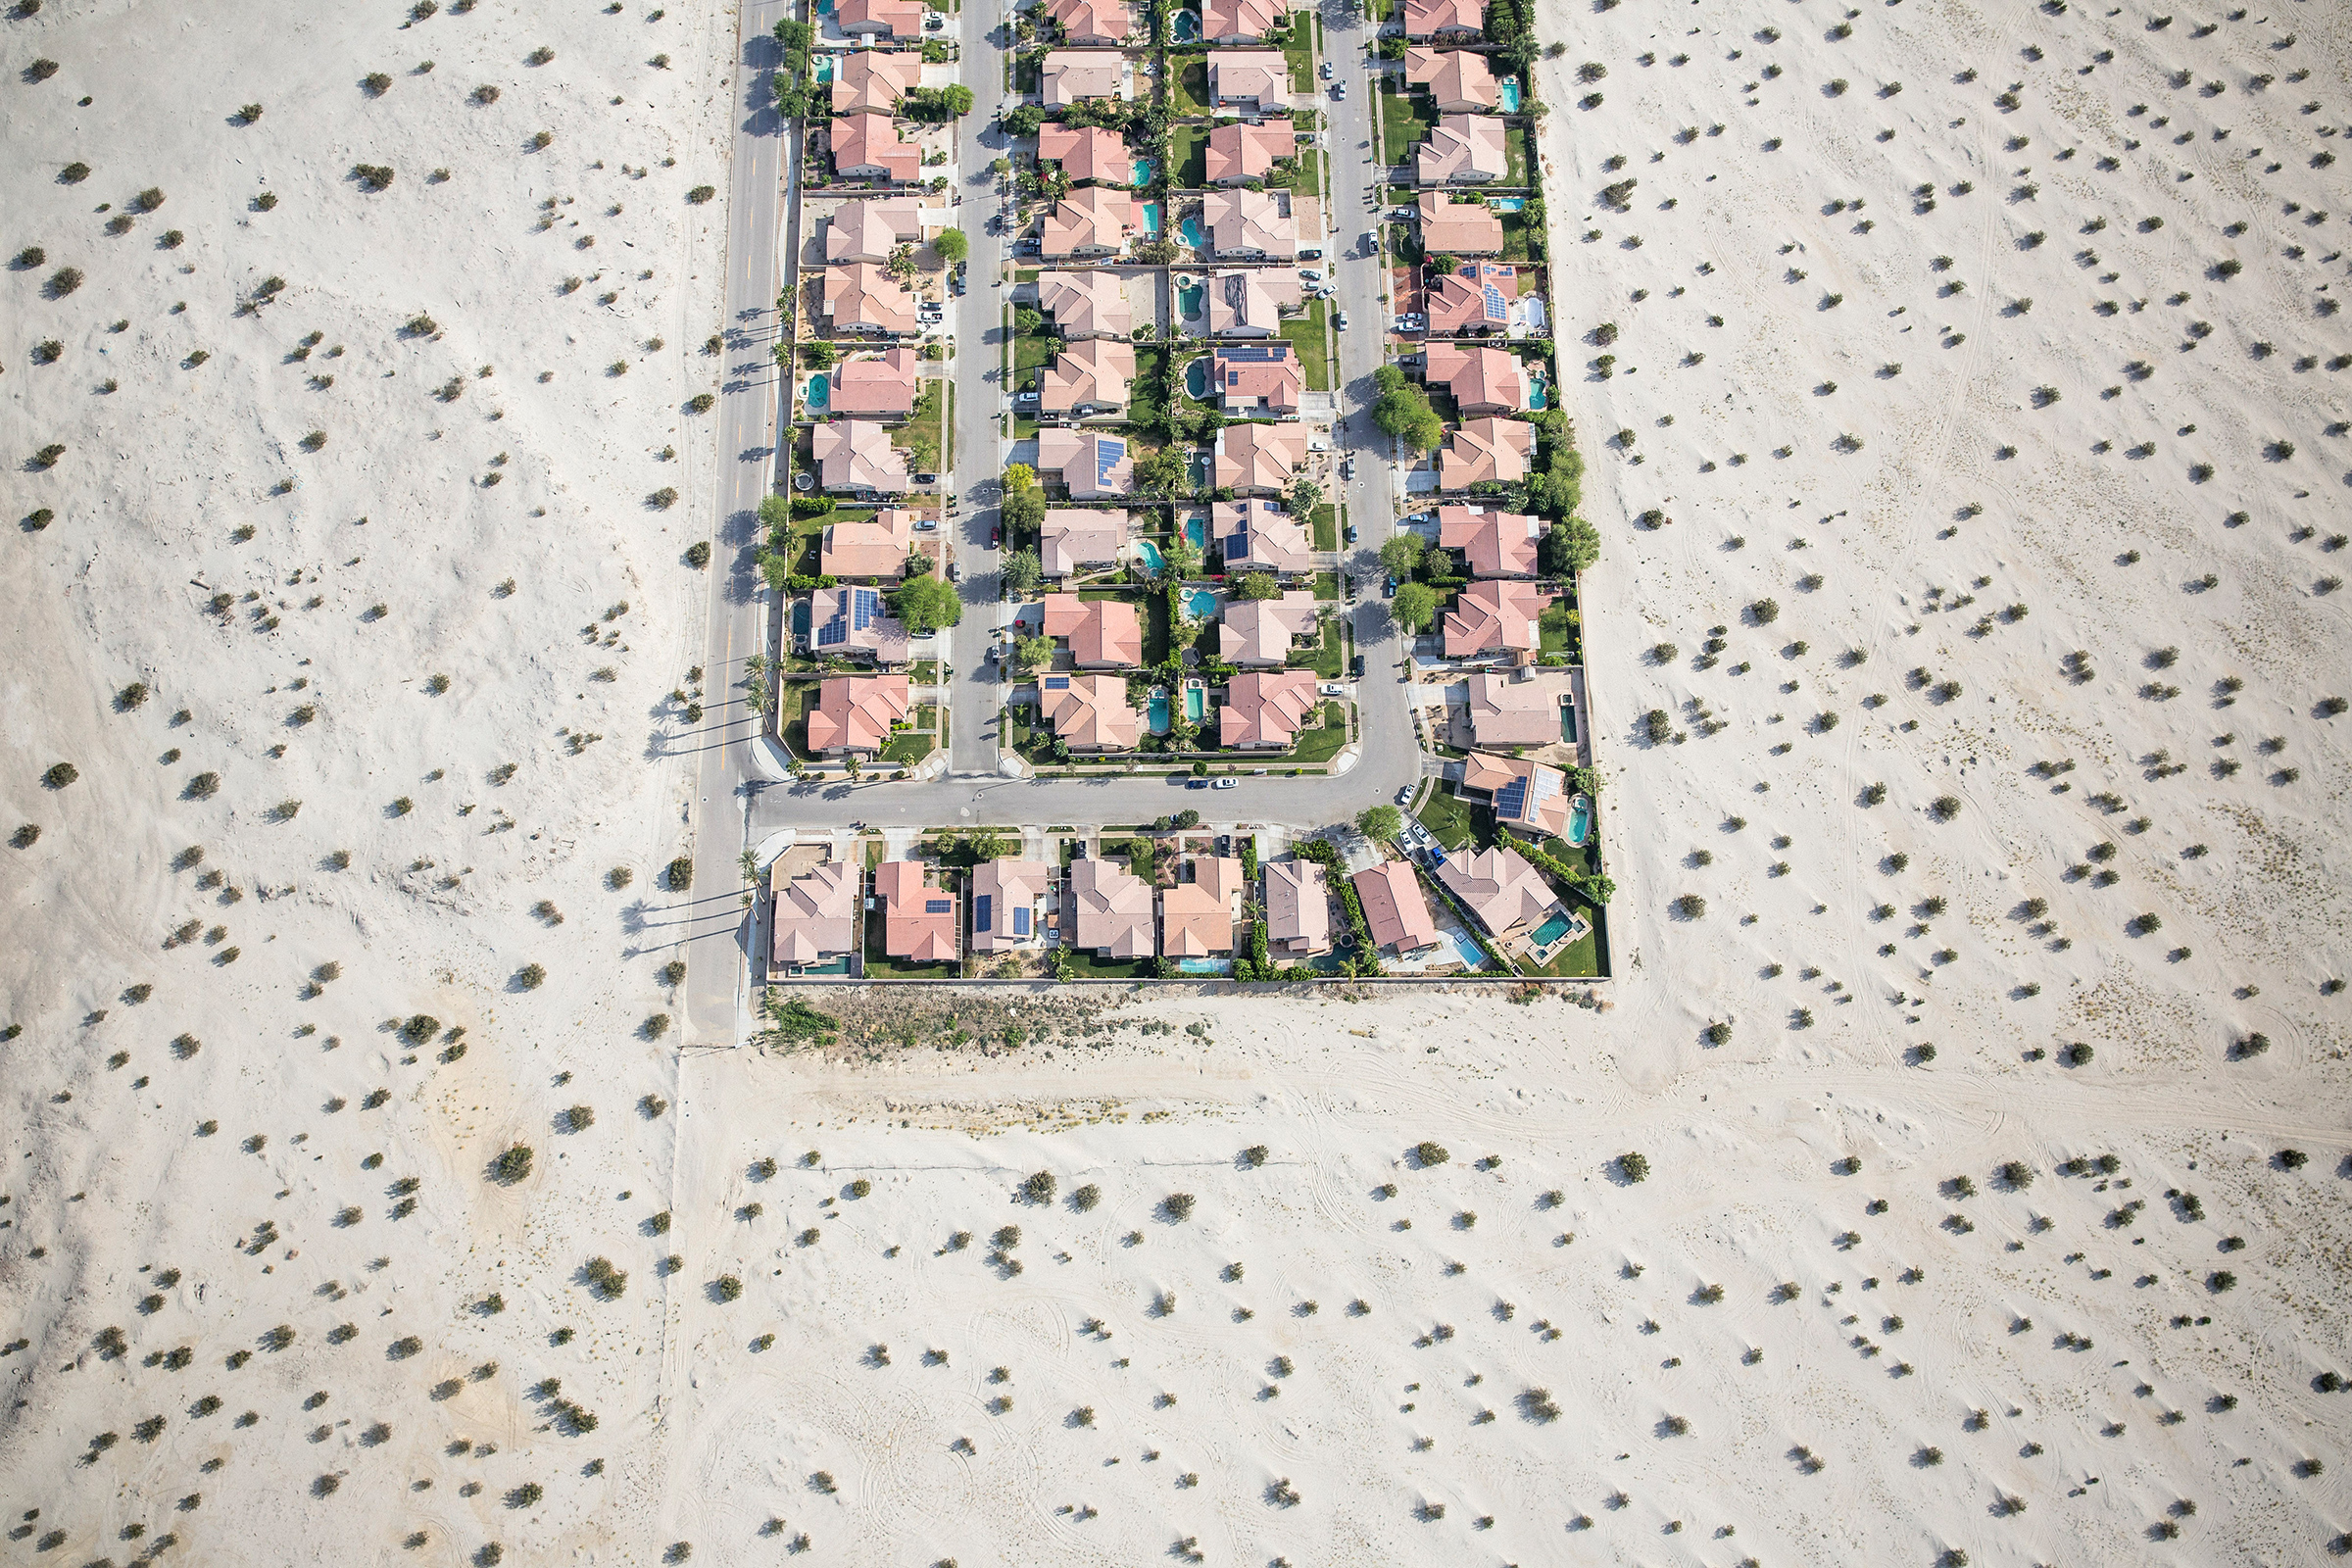 A housing development on the edge of undeveloped desert in Cathedral City, Calif.